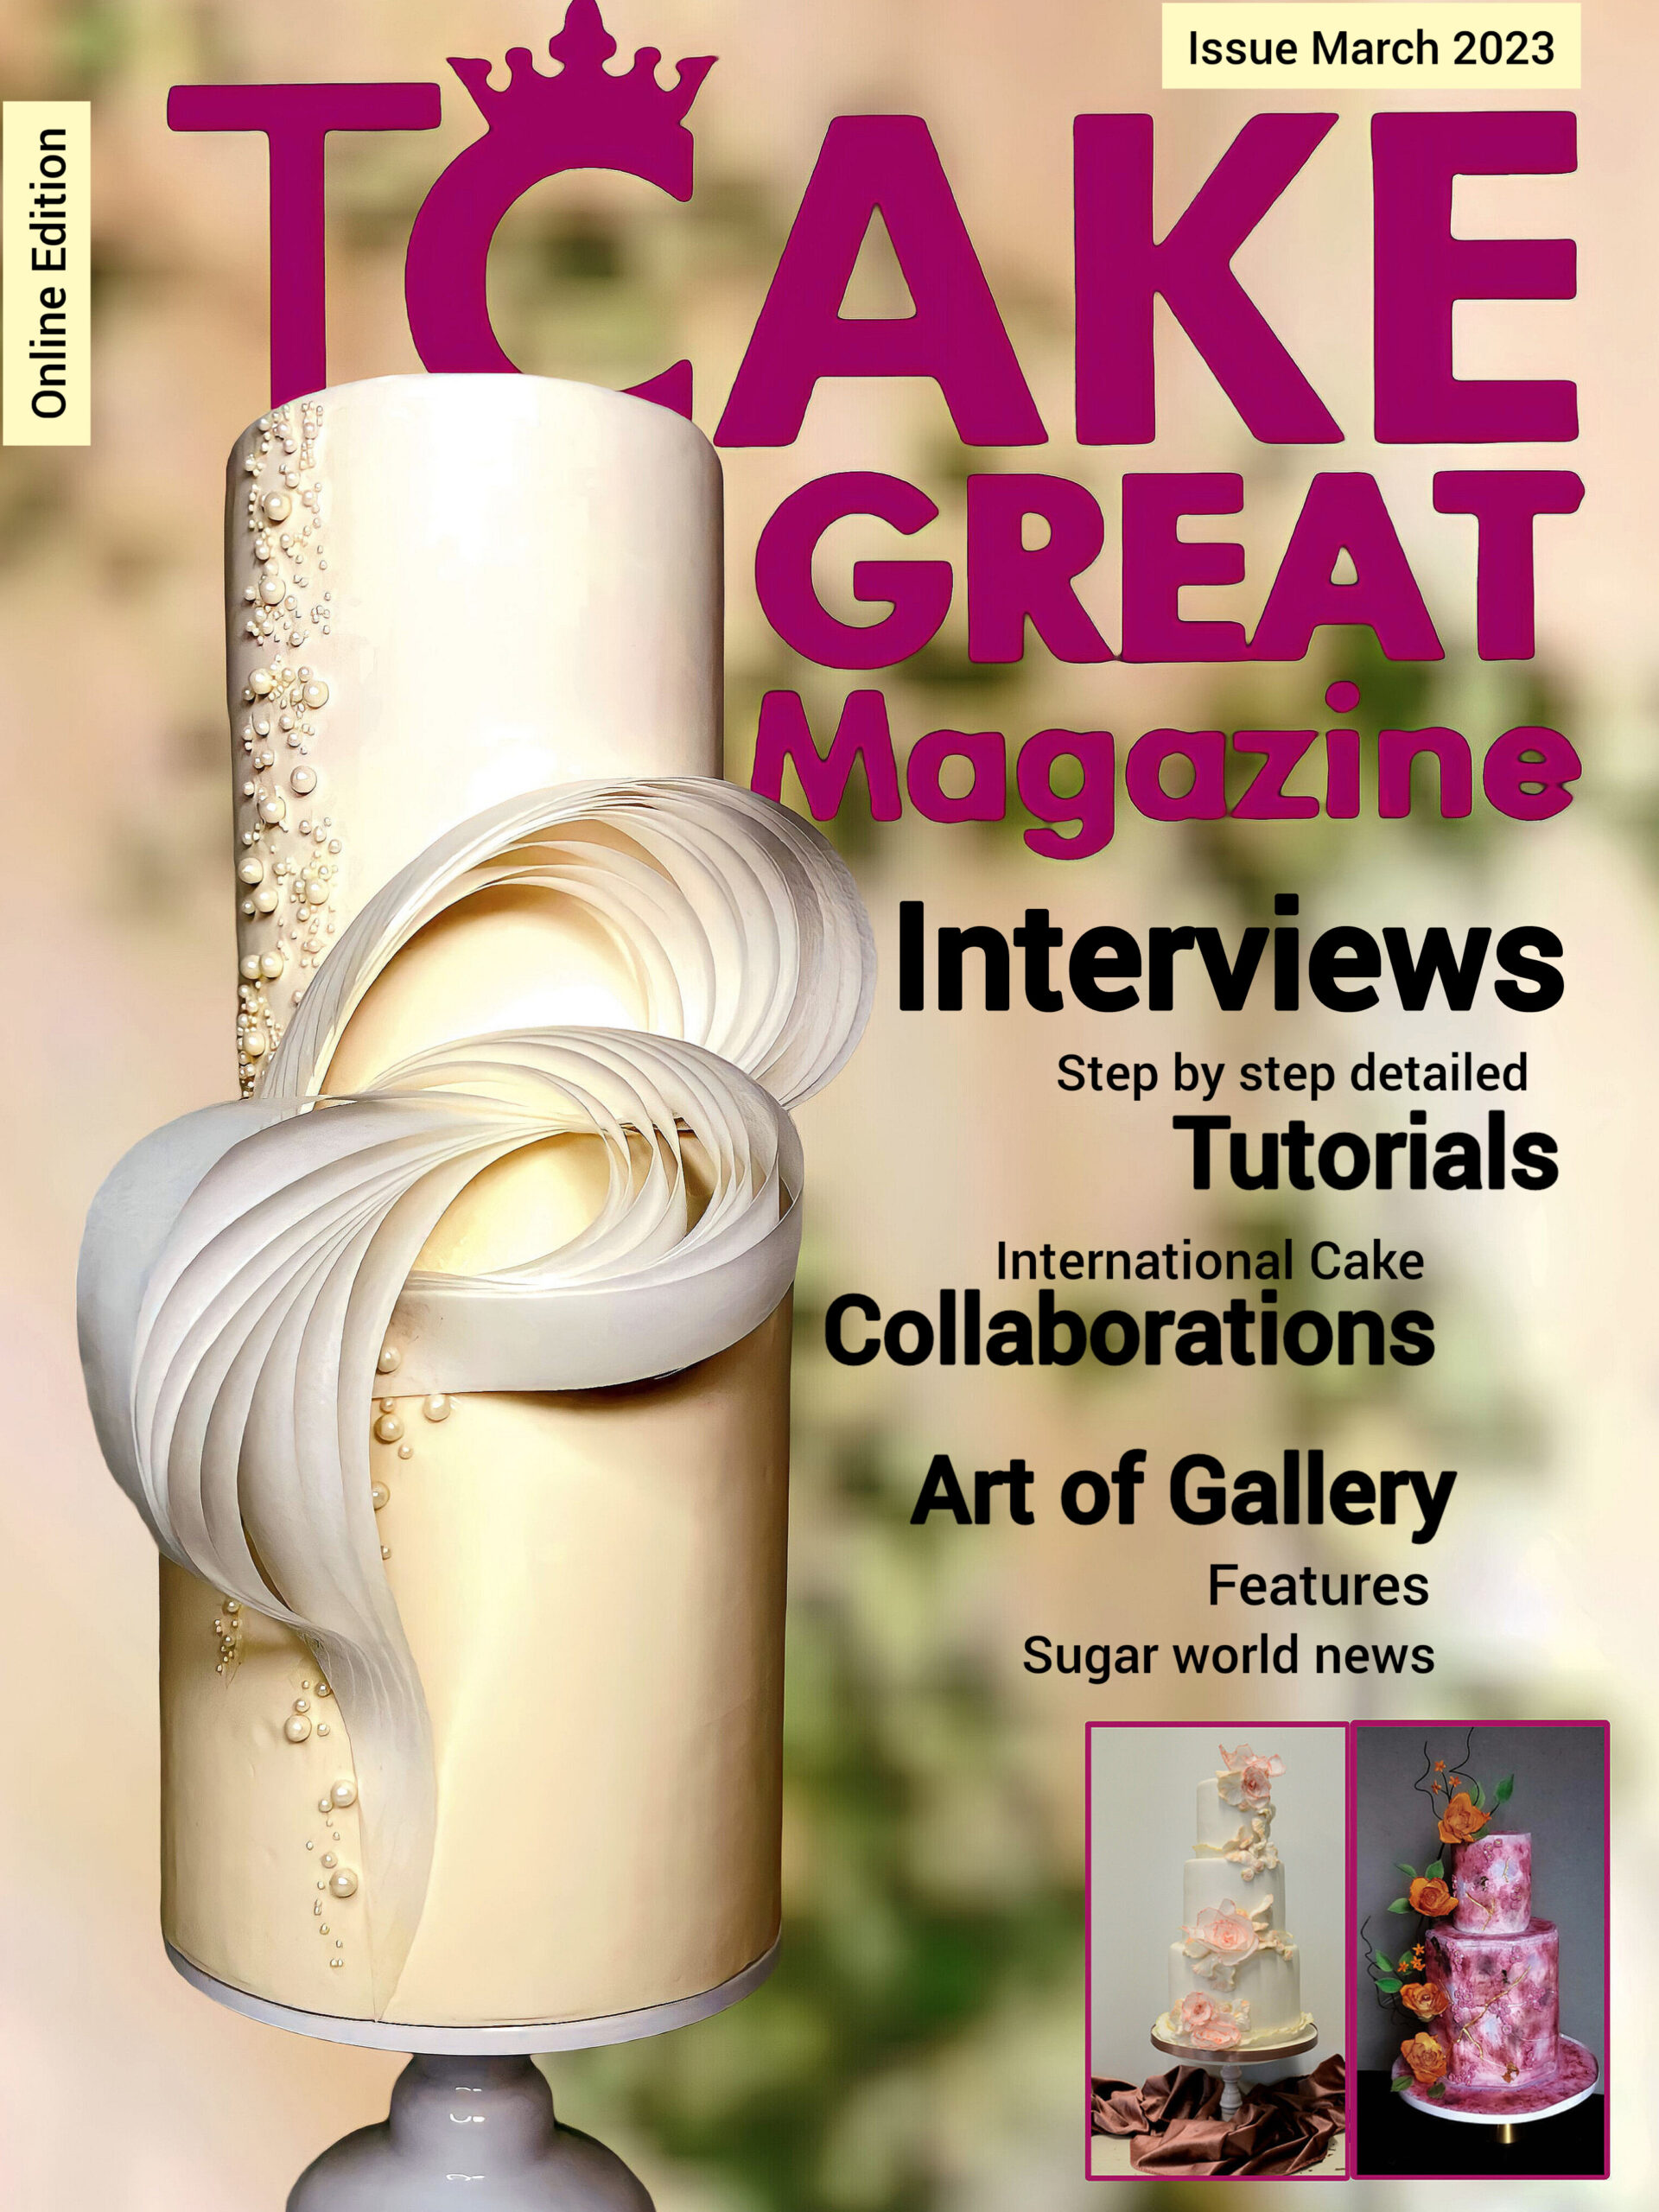 With Love & Confection: My Cake Central Magazine Cover Cake